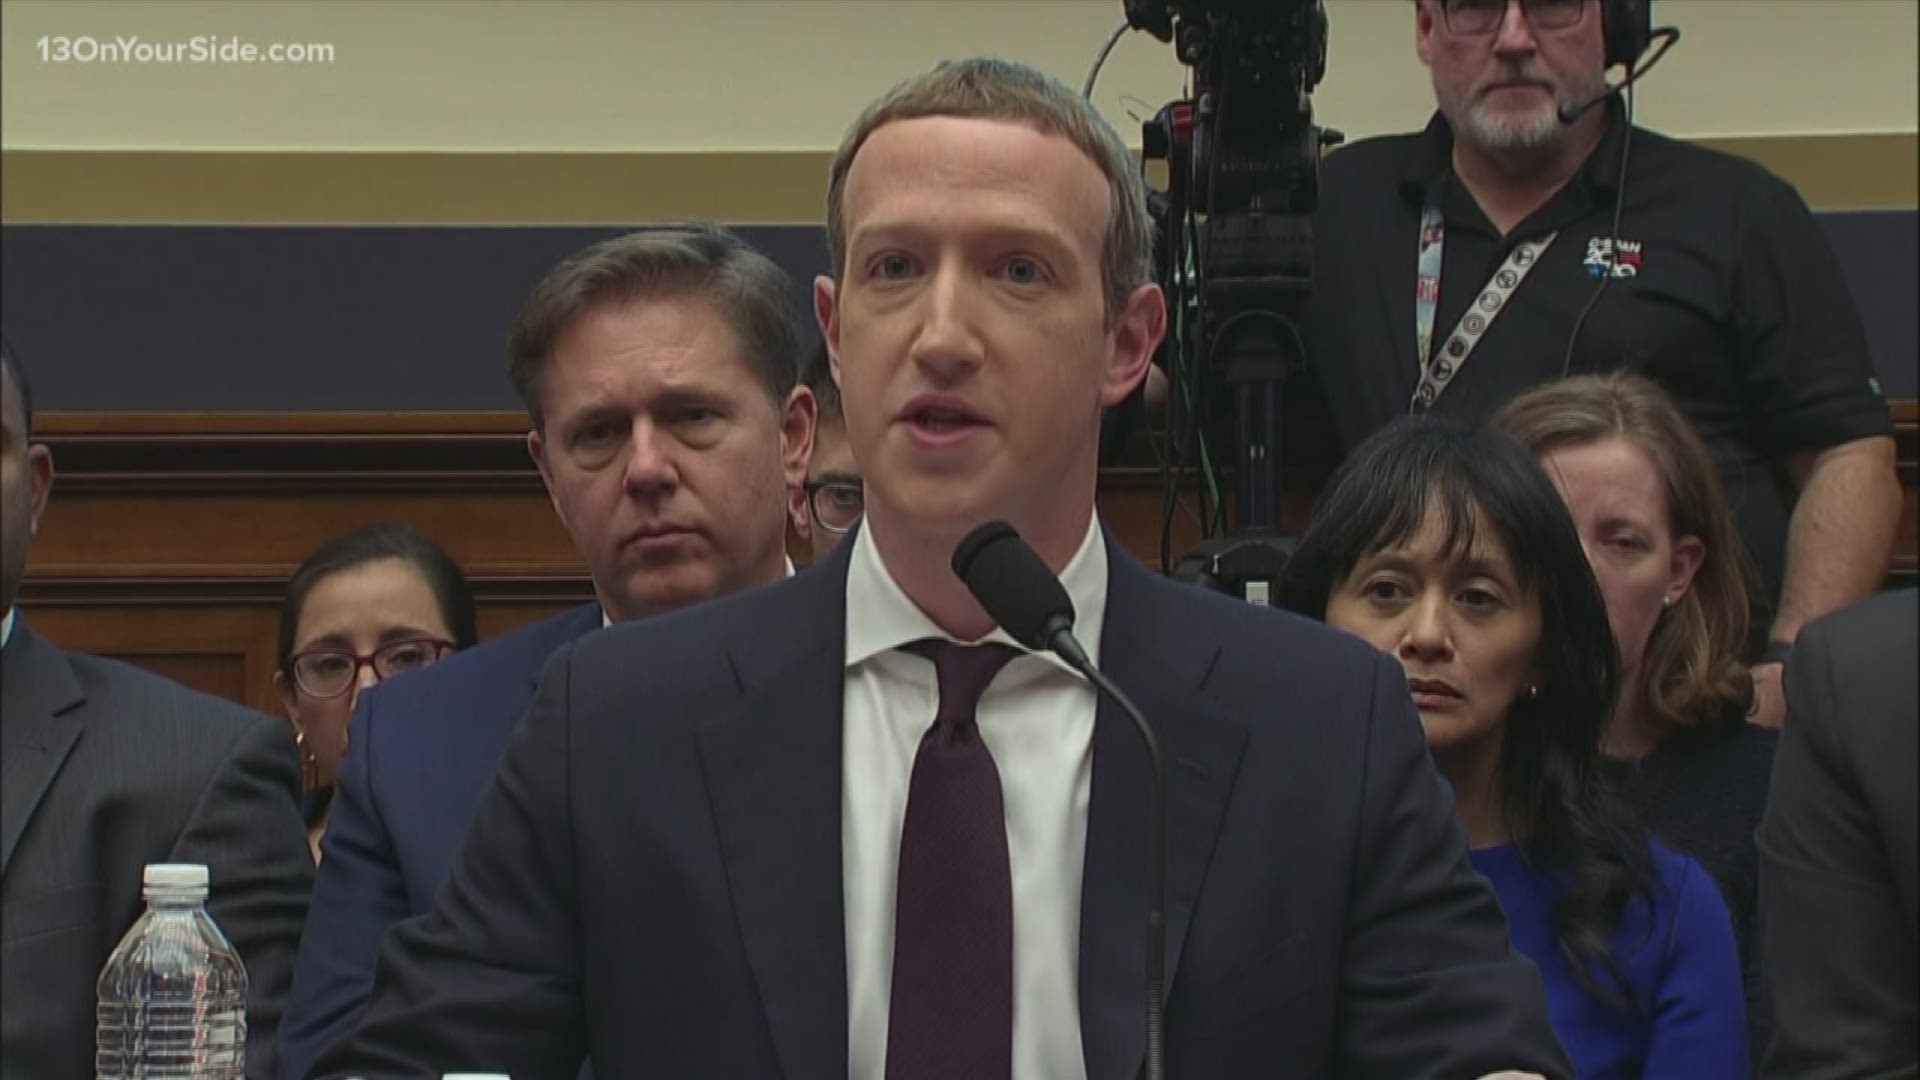 While the hearing is focused on the digital currency, the full range of Facebook's policies, conduct and market dominance is attracting congressional attention.